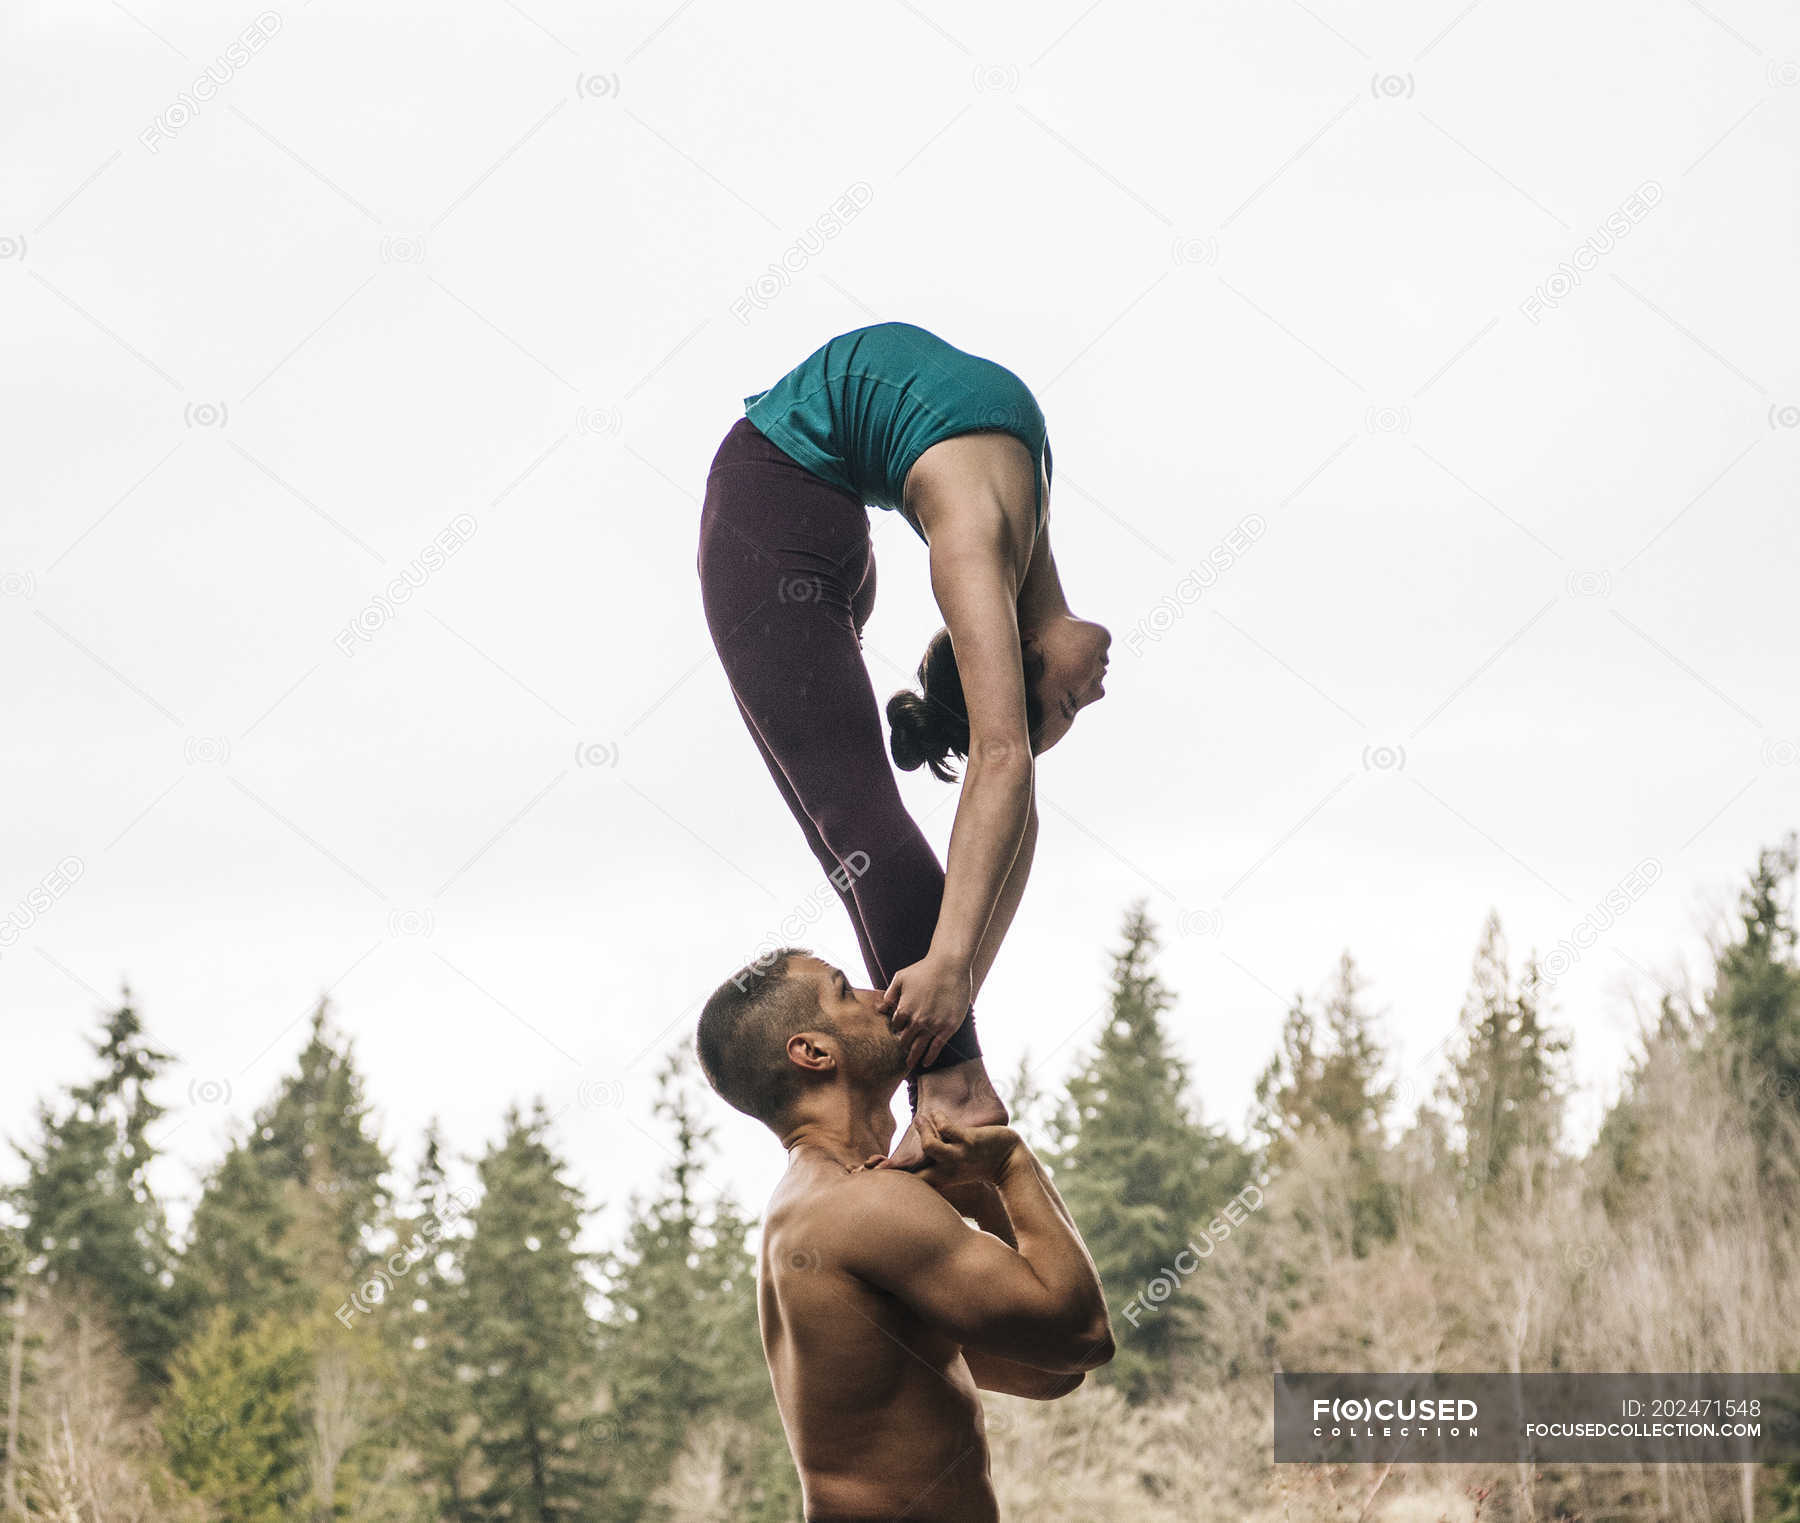 Couple Practicing Acroyoga With Forest At Background Full Frame